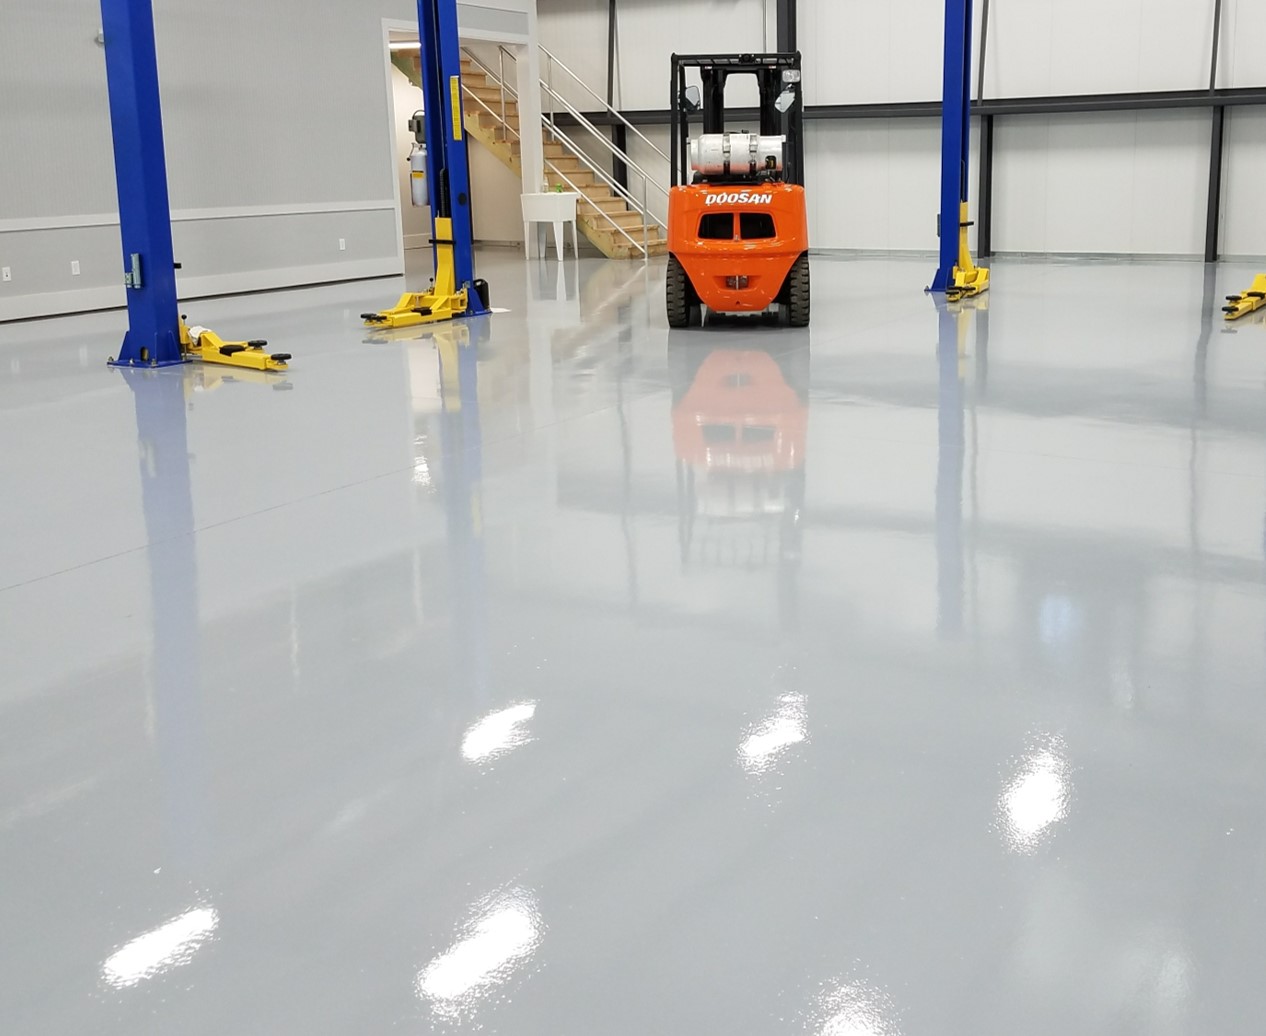 Your Guide To Choosing Epoxy Flakes